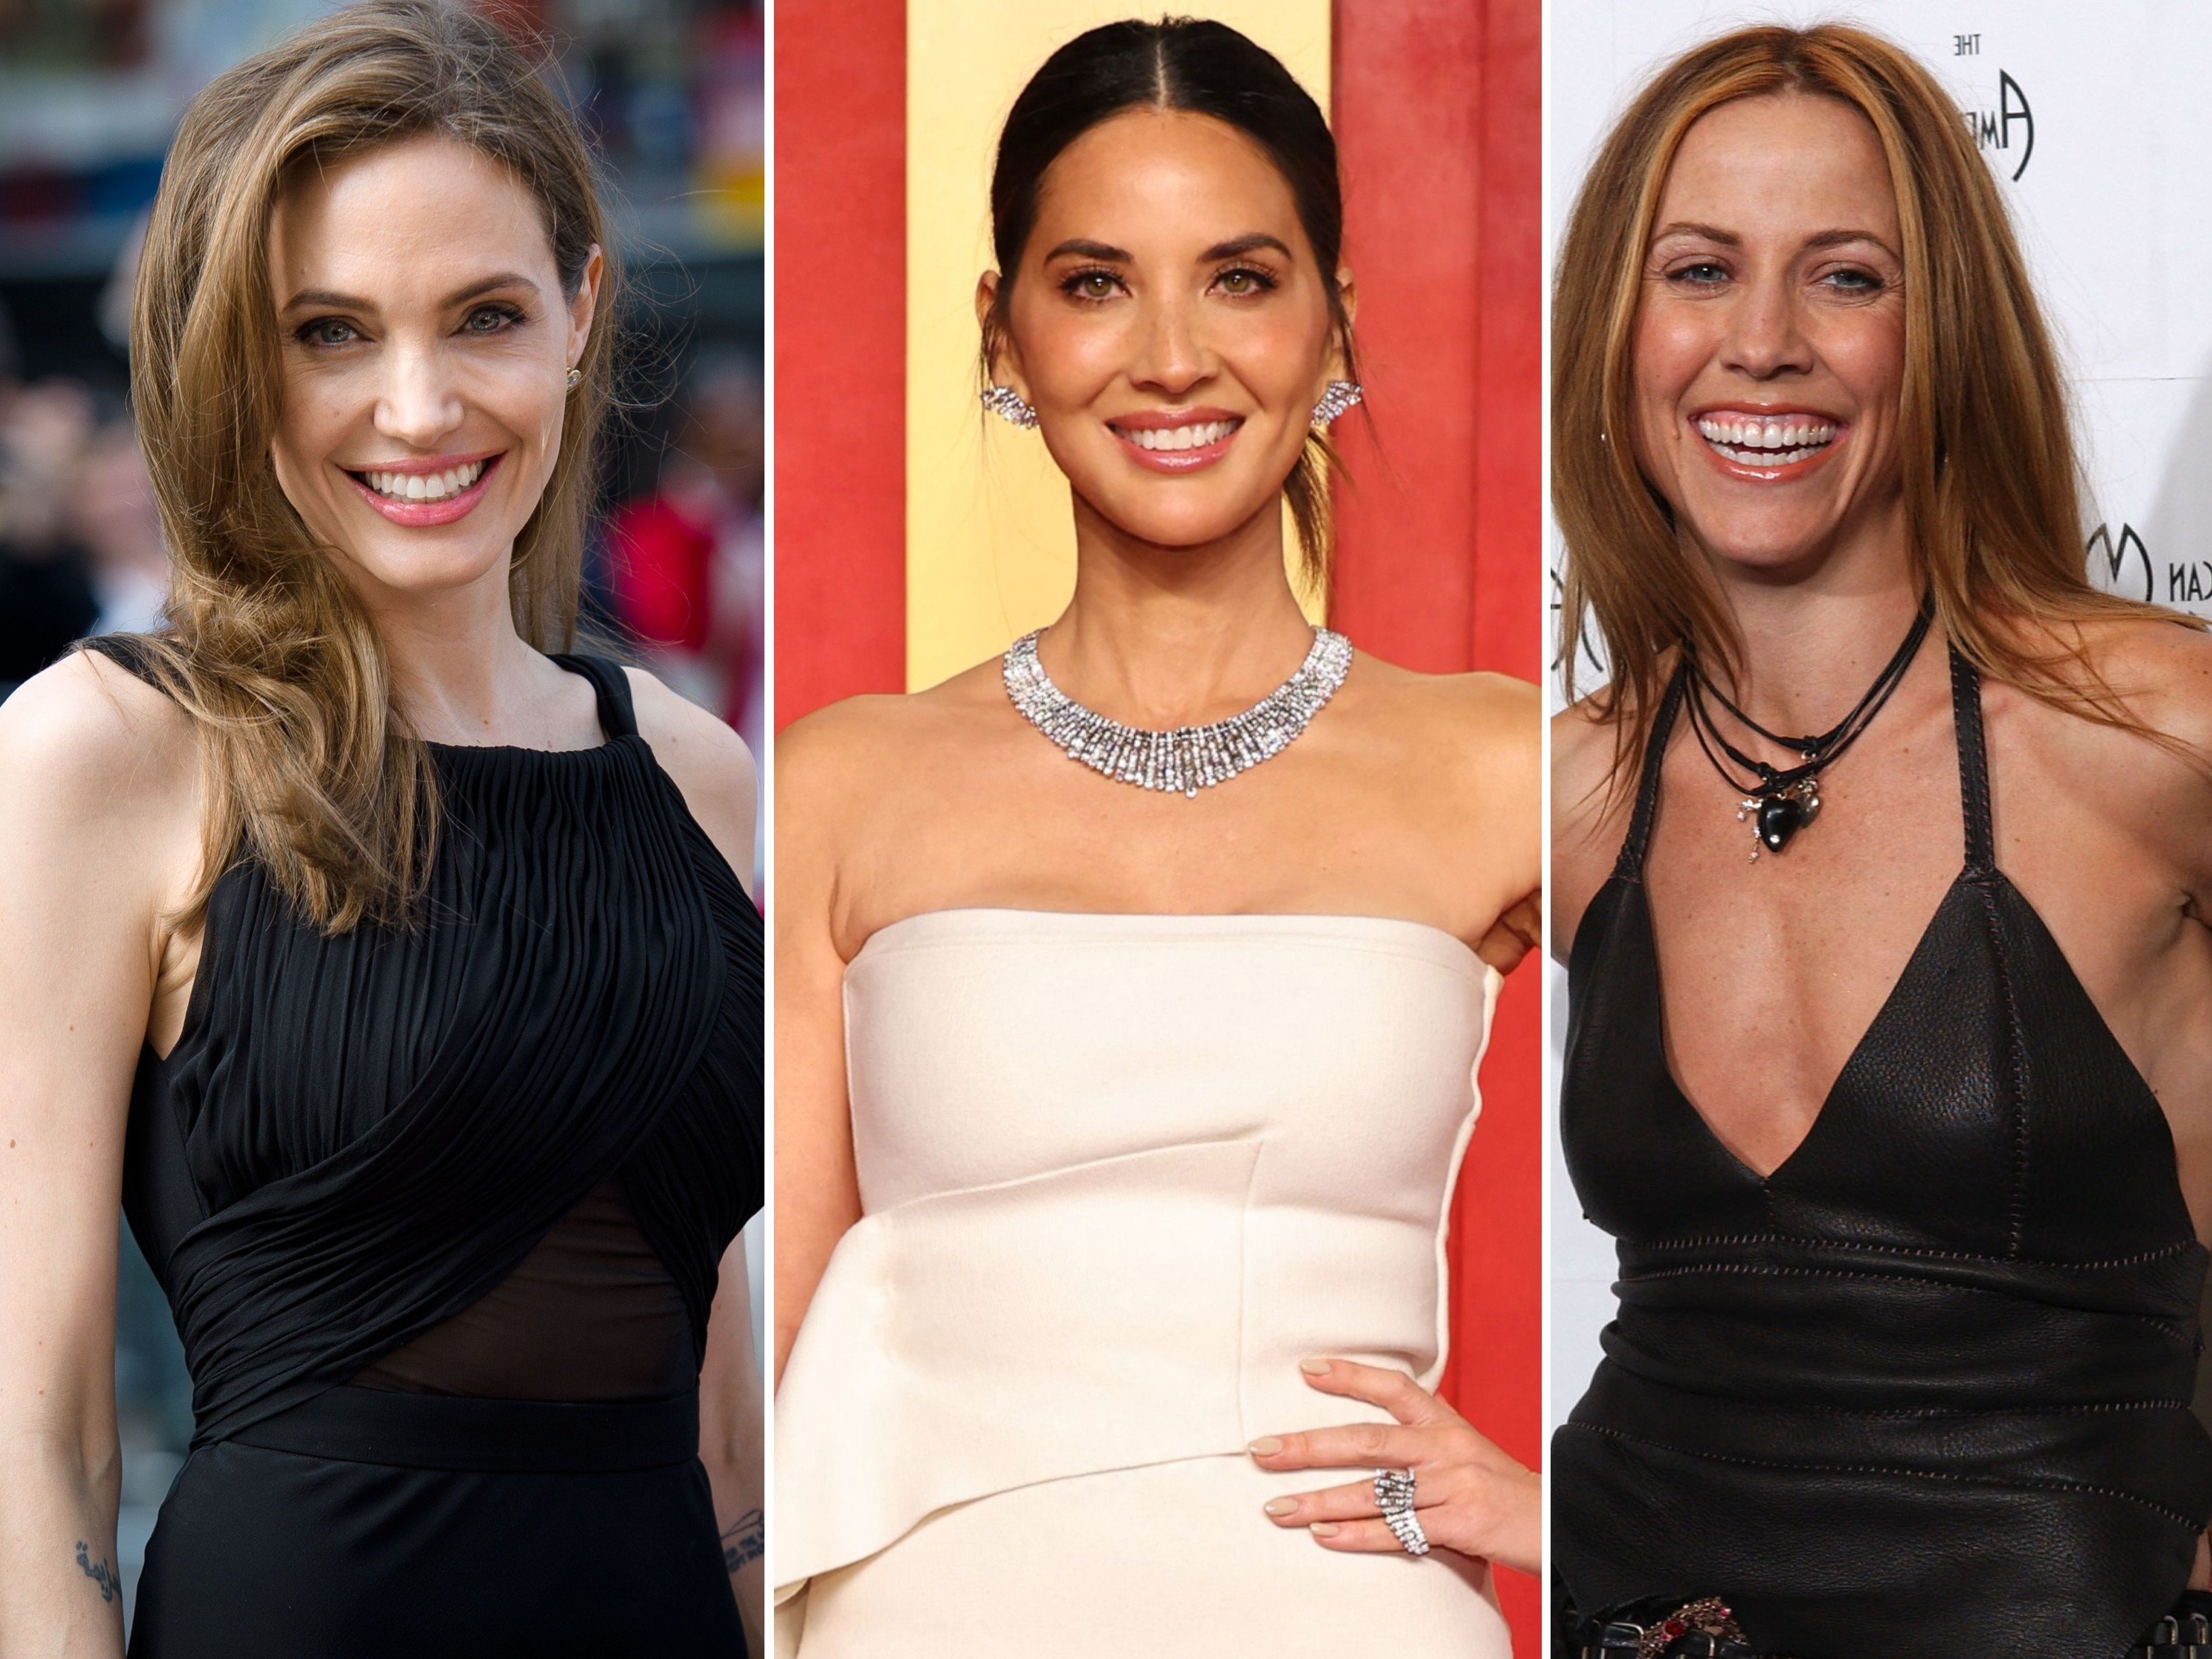 Hollywood celebs like Angelina Jolie, Olivia Munn and Sheryl Crow have all either advocated for breast cancer awareness or survived the disease. Photos: AFP